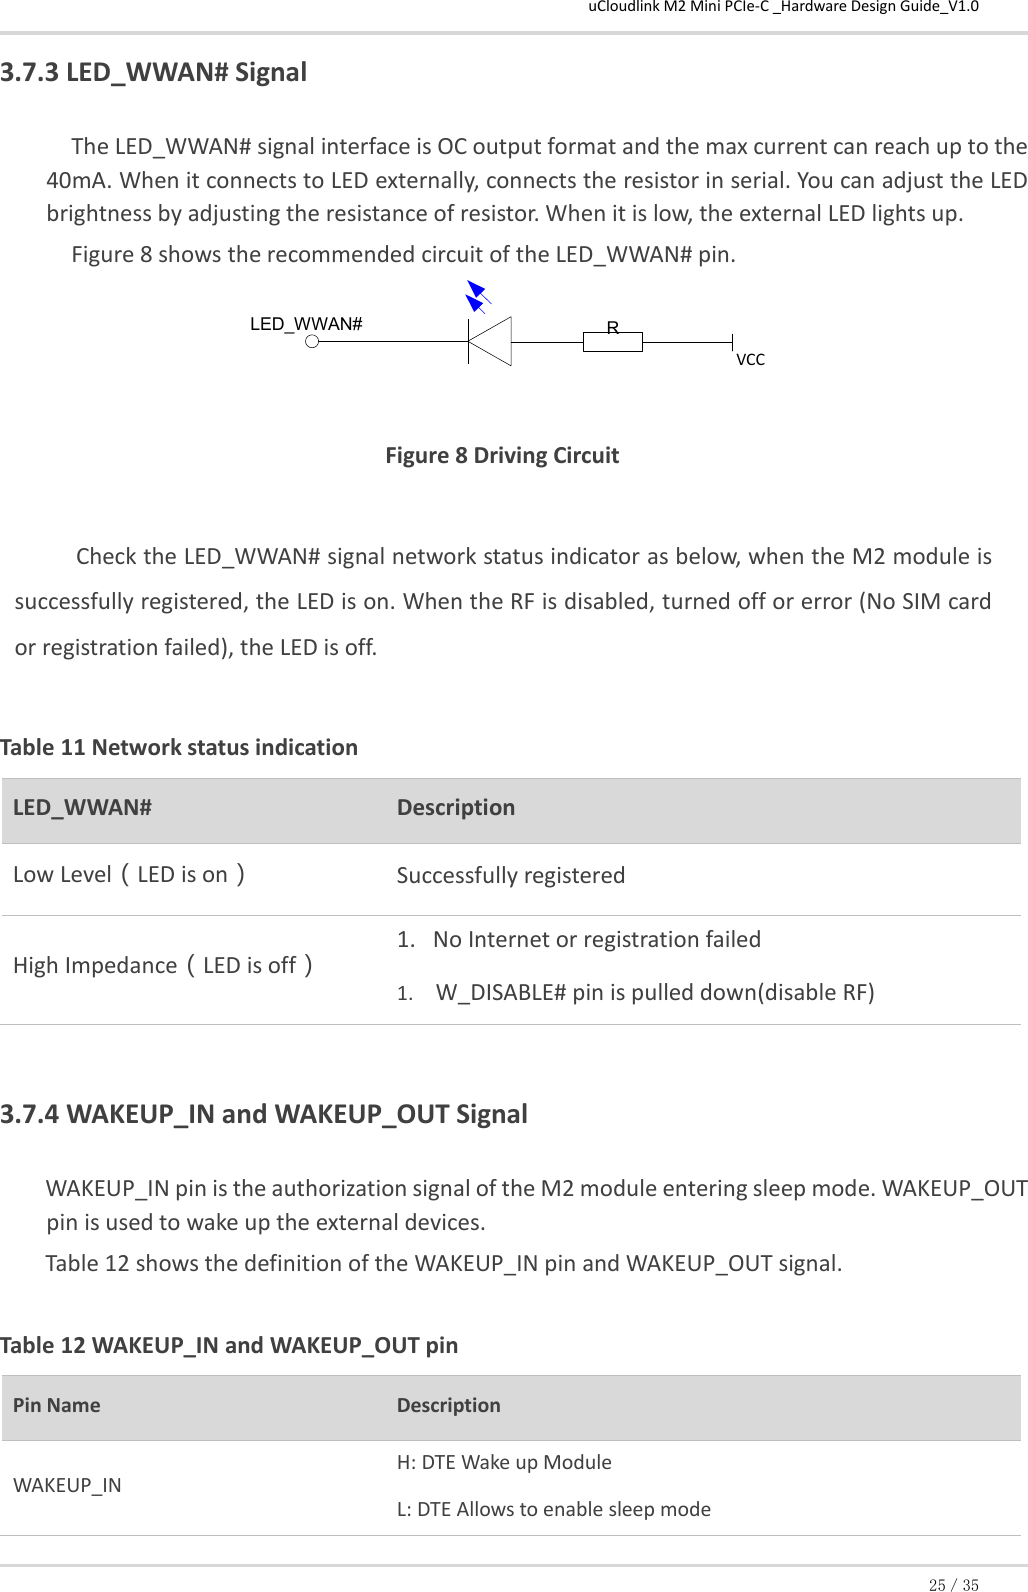 uCloudlink M2 Mini PCIe-C _Hardware Design Guide_V1.0 25／35 3.7.3 LED_WWAN# Signal The LED_WWAN# signal interface is OC output format and the max current can reach up to the 40mA. When it connects to LED externally, connects the resistor in serial. You can adjust the LED brightness by adjusting the resistance of resistor. When it is low, the external LED lights up. Figure 8 shows the recommended circuit of the LED_WWAN# pin.  VCC Figure 8 Driving Circuit             Check the LED_WWAN# signal network status indicator as below, when the M2 module is successfully registered, the LED is on. When the RF is disabled, turned off or error (No SIM card or registration failed), the LED is off.  Table 11 Network status indication LED_WWAN#  Description  Low Level（LED is on）  Successfully registered High Impedance（LED is off）  1.   No Internet or registration failed 1. W_DISABLE# pin is pulled down(disable RF)   3.7.4 WAKEUP_IN and WAKEUP_OUT Signal WAKEUP_IN pin is the authorization signal of the M2 module entering sleep mode. WAKEUP_OUT pin is used to wake up the external devices. Table 12 shows the definition of the WAKEUP_IN pin and WAKEUP_OUT signal.  Table 12 WAKEUP_IN and WAKEUP_OUT pin Pin Name  Description WAKEUP_IN  H: DTE Wake up Module  L: DTE Allows to enable sleep mode  LED_WWAN# R 